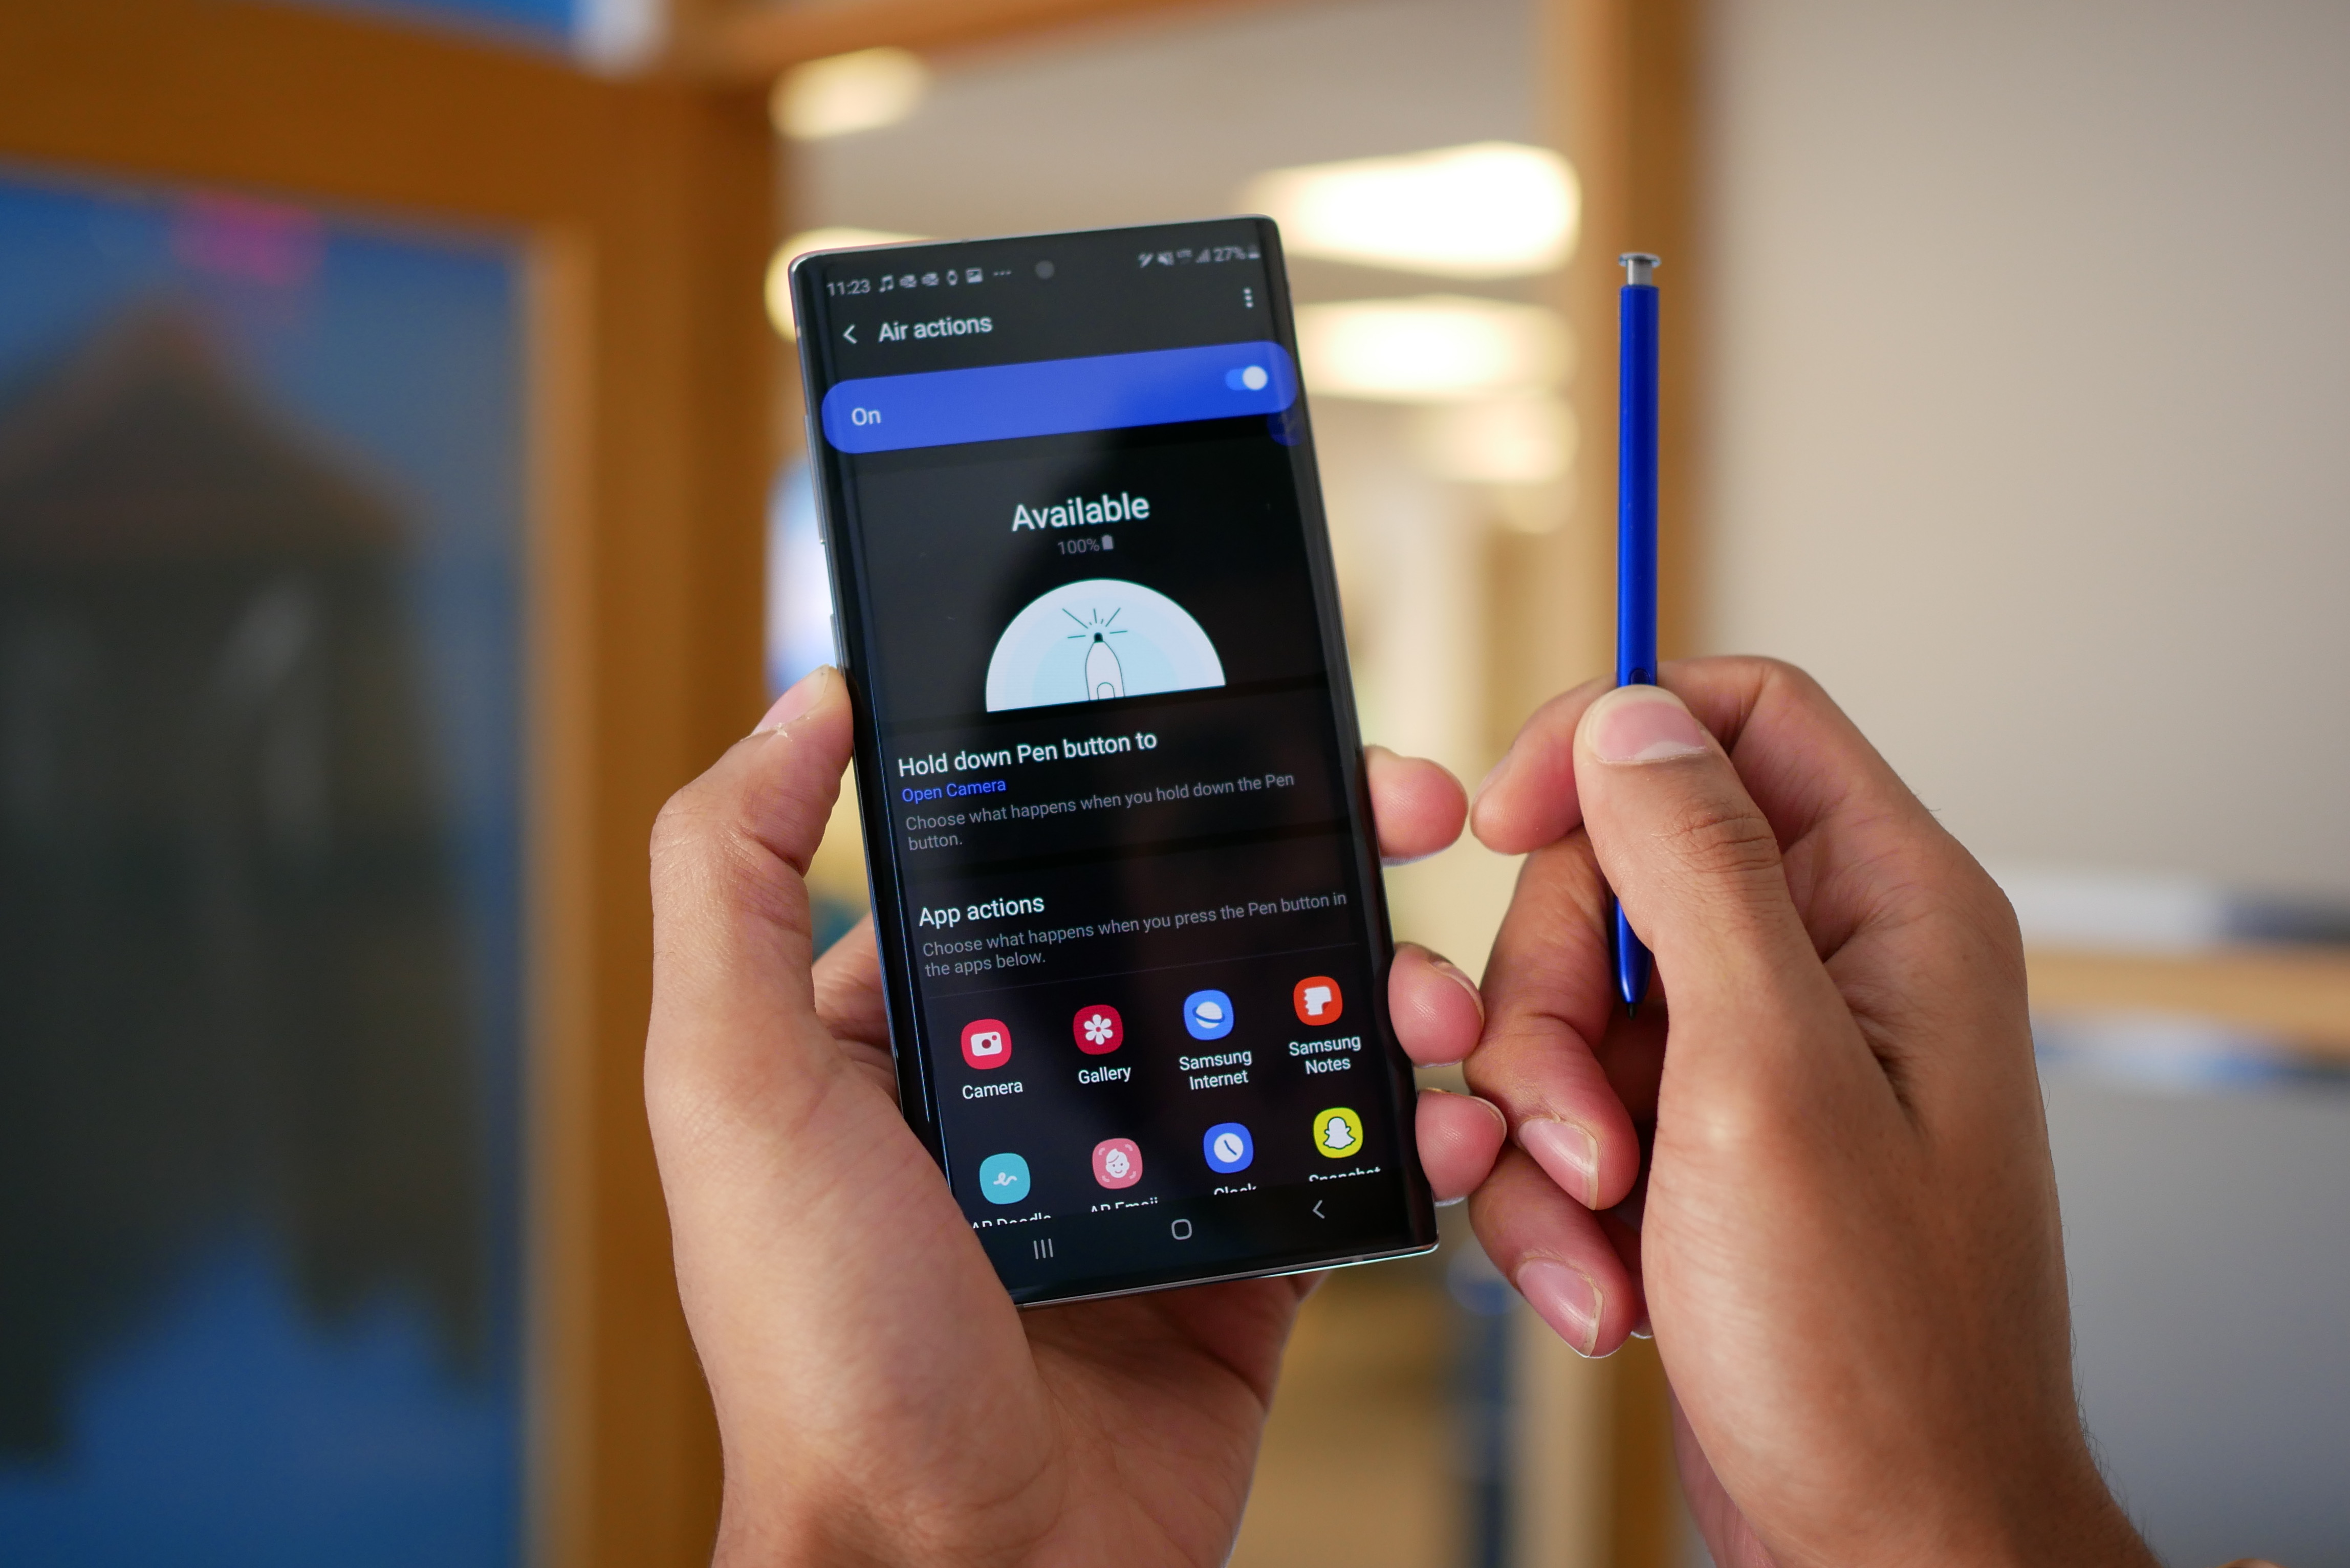 Samsung Galaxy Note 20 Ultra Review - Ahead of the Curve